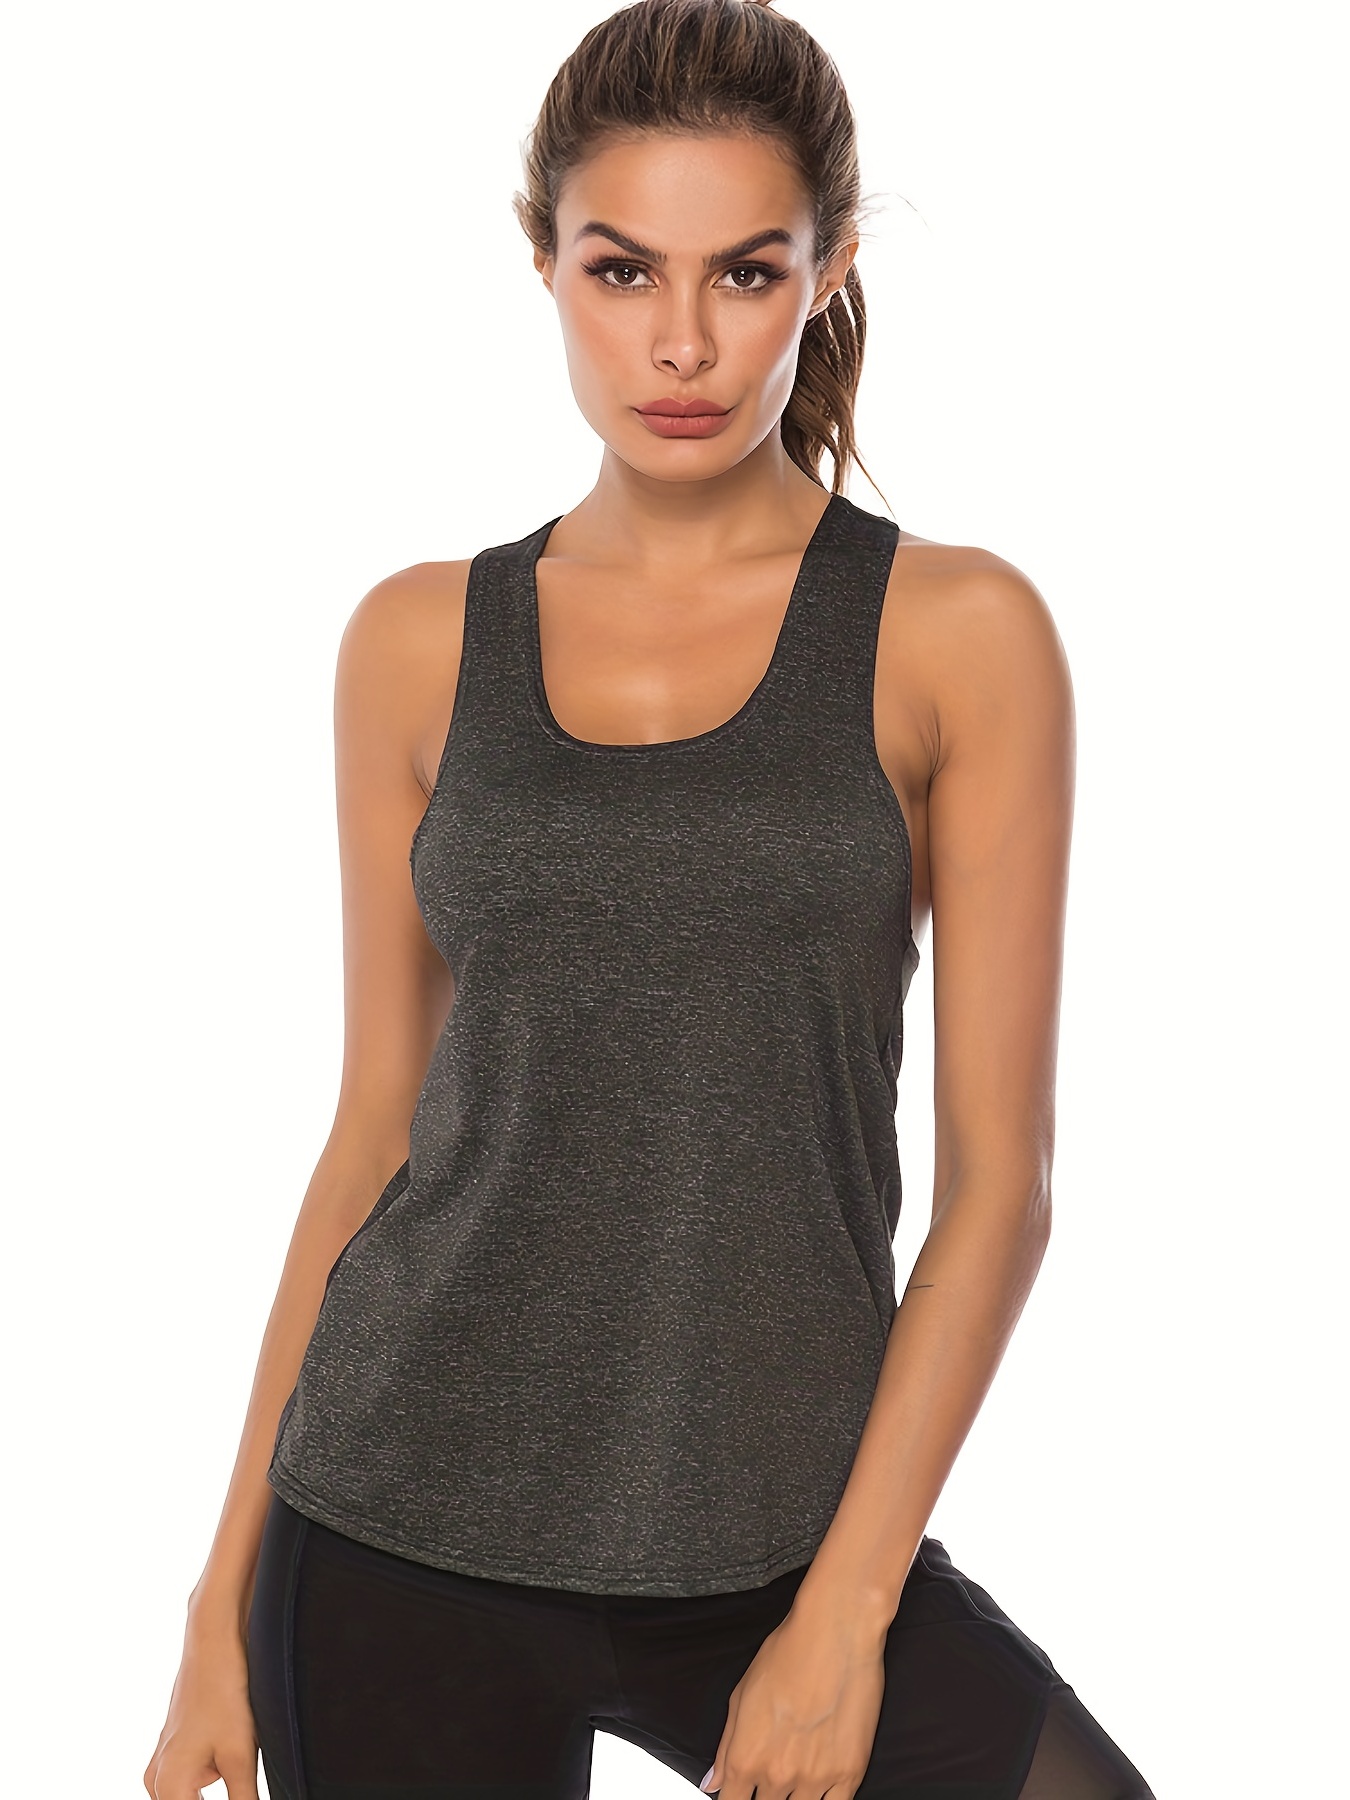 Send Noods Women's Fashion Sleeveless Muscle Workout Yoga Tank Top Charcoal  Grey Small